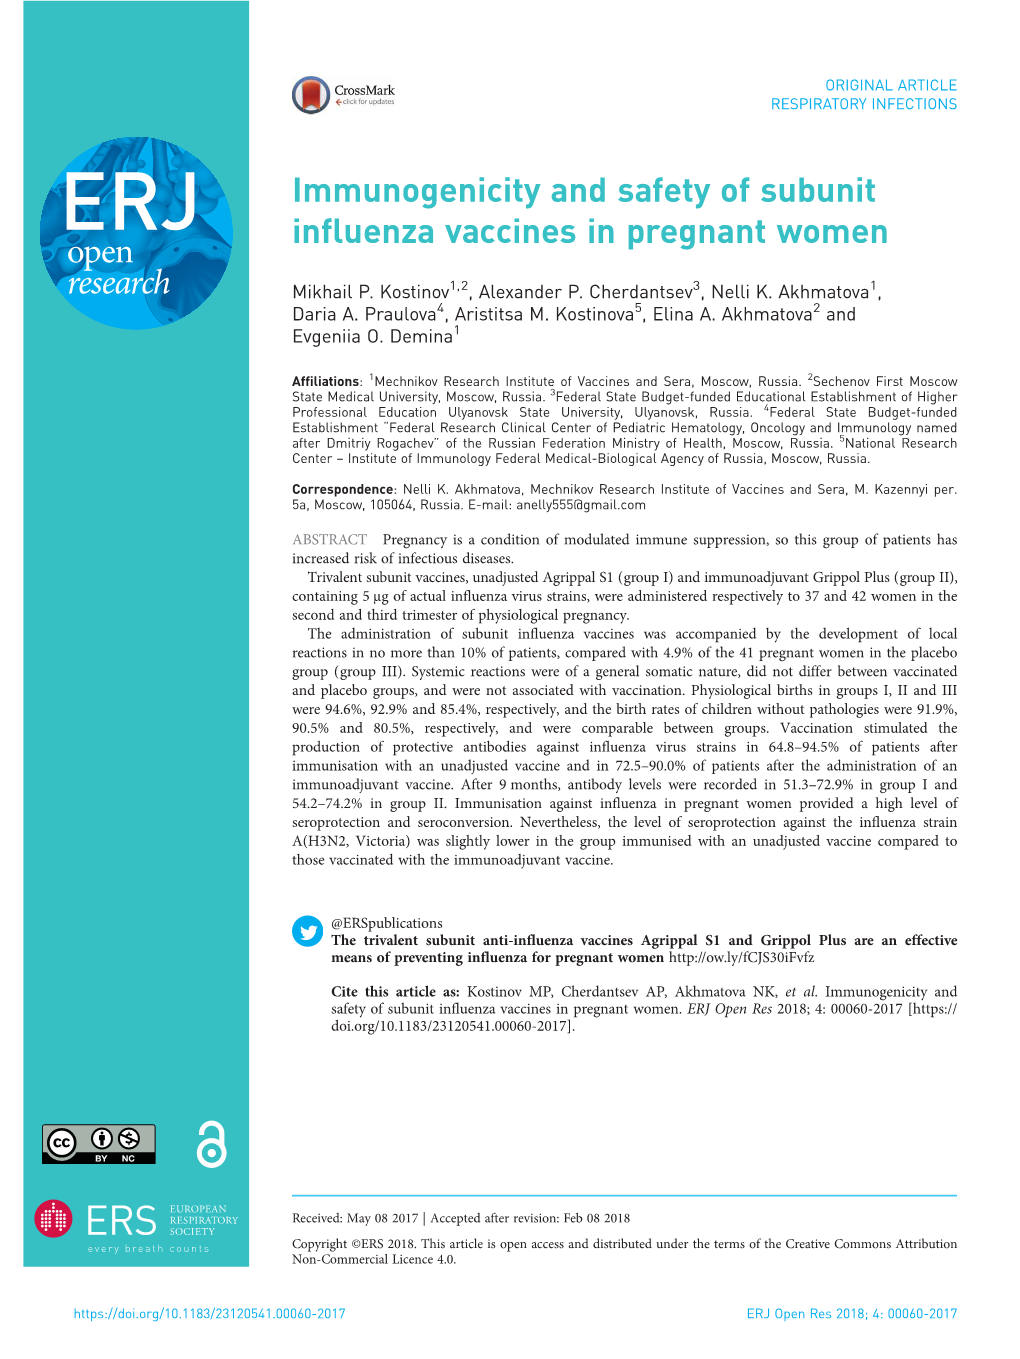 Immunogenicity and Safety of Subunit Influenza Vaccines in Pregnant Women